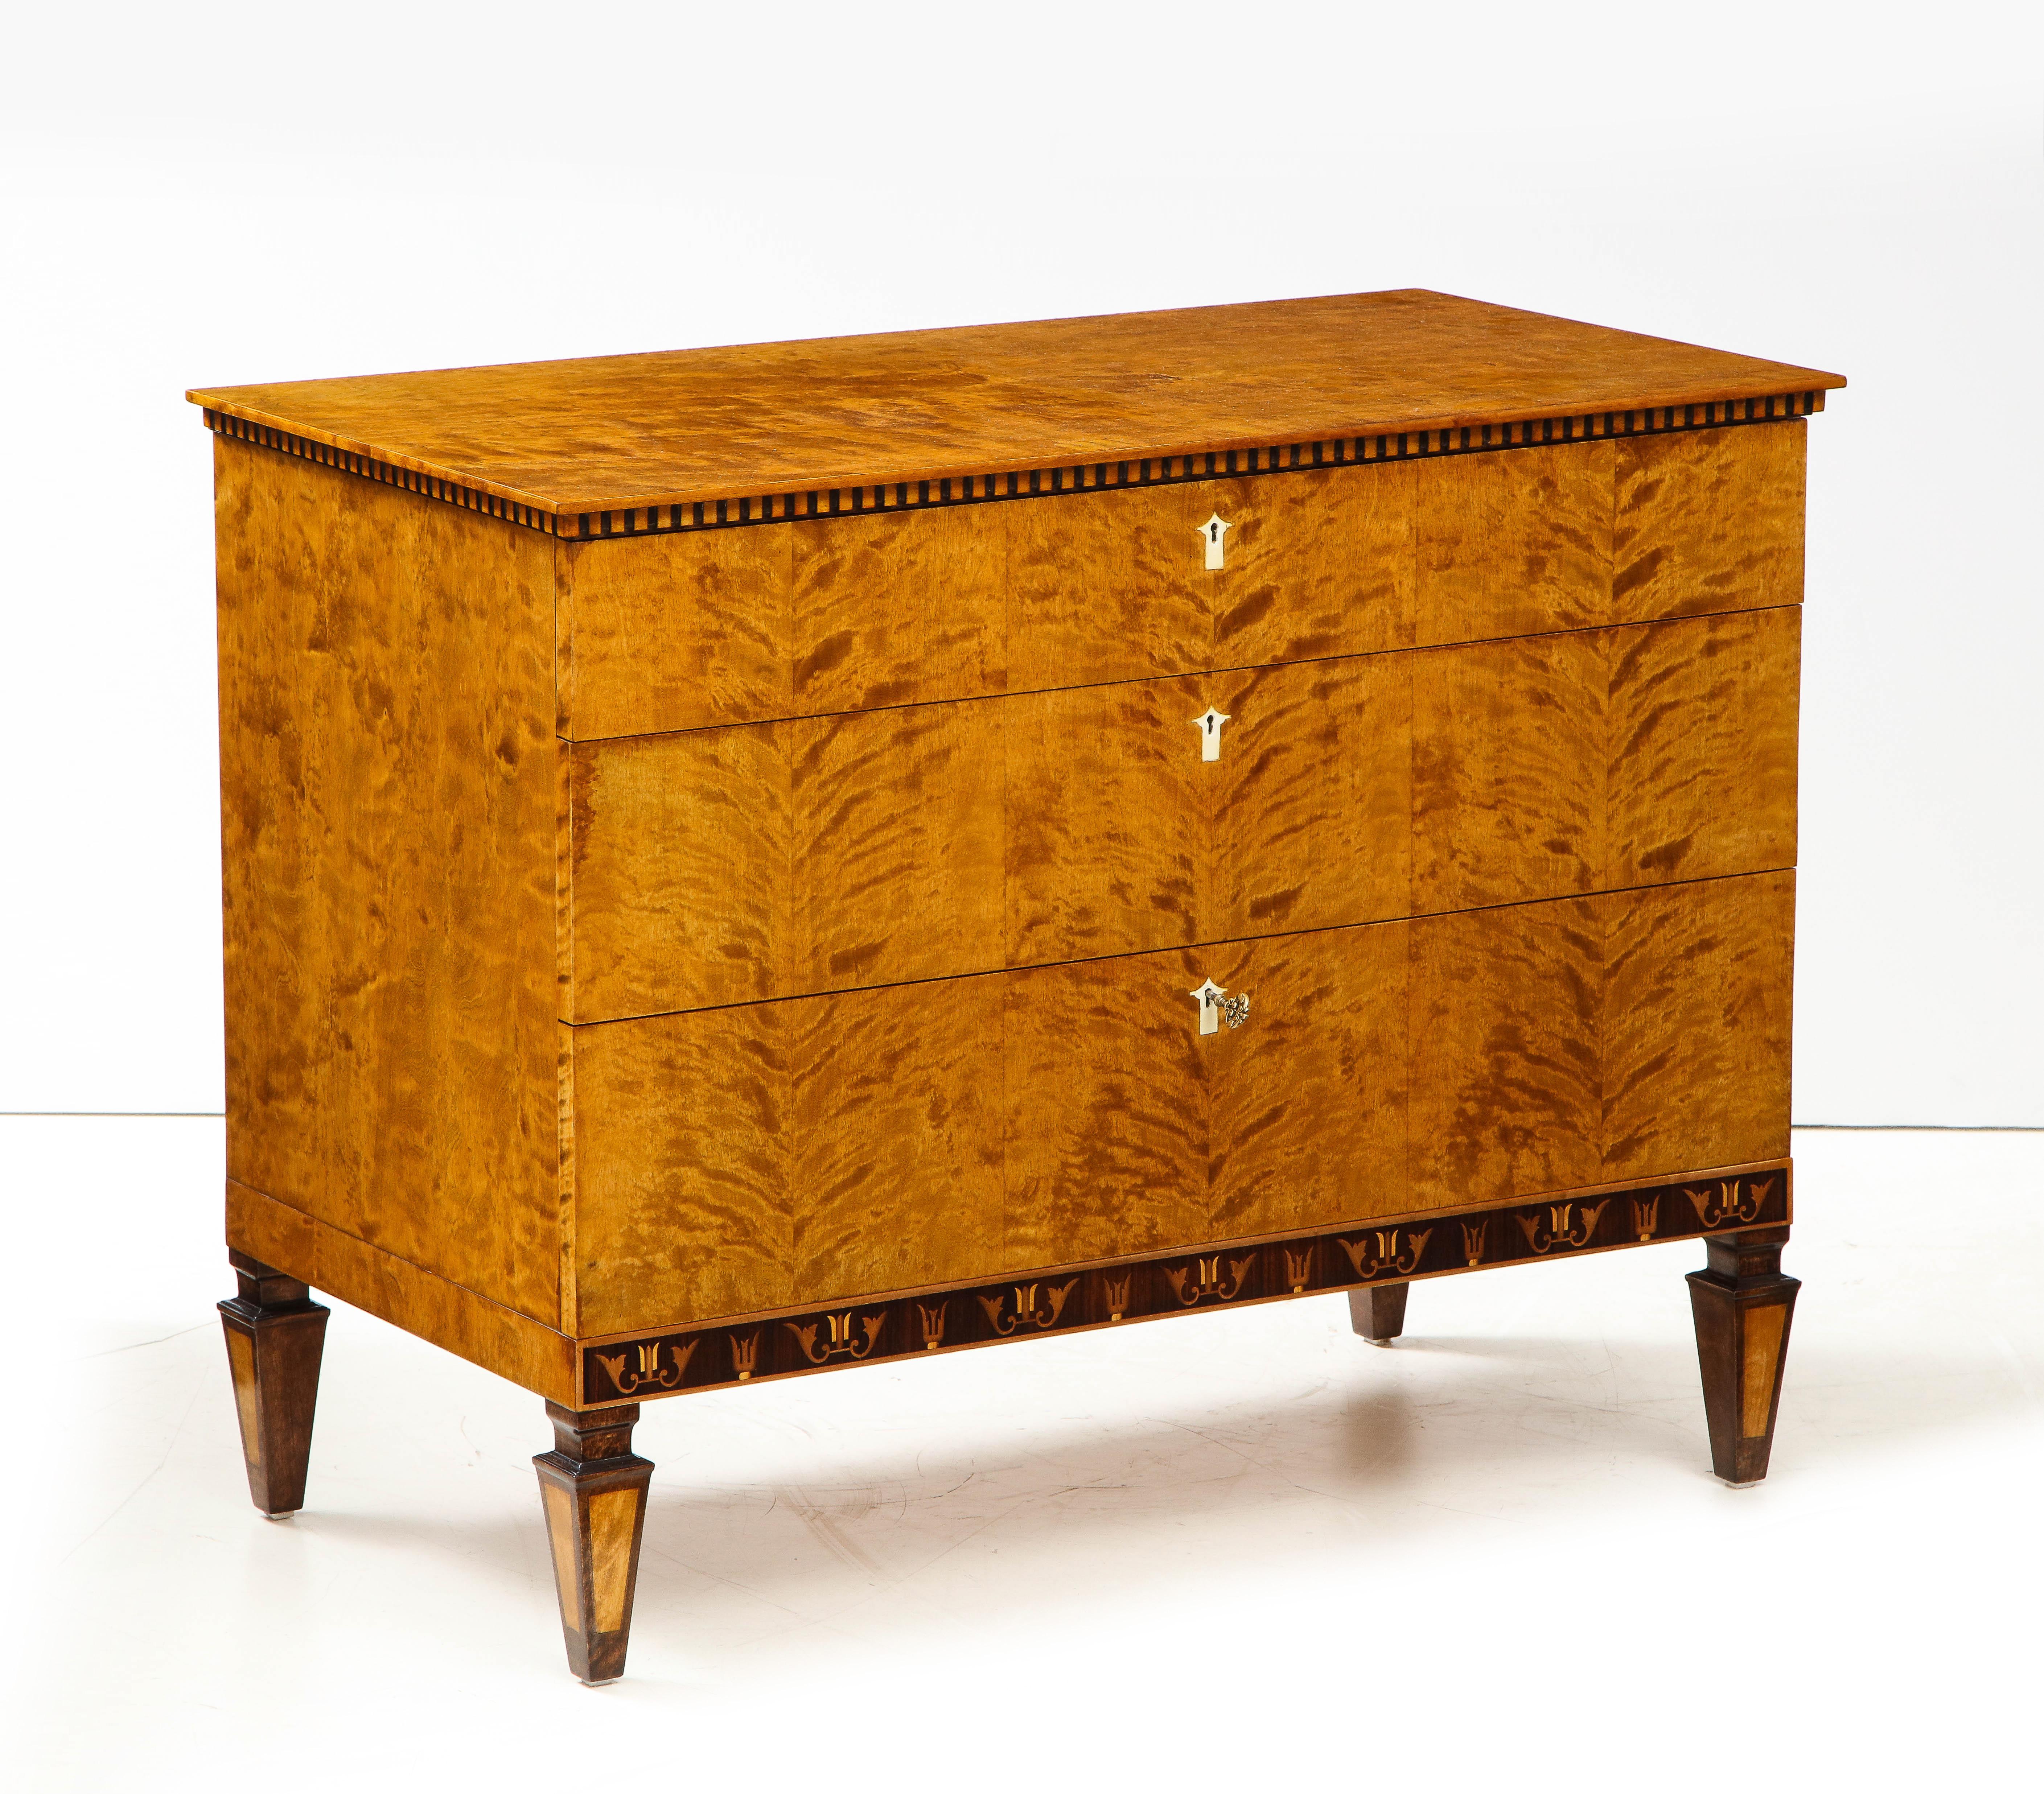 A Swedish Grace flamed birch wood and palisander inlaid chest of drawers, Circa 1920-1930, the rectangular top above a dentil molded frieze and three long drawers, the lower frieze with Classic Swedish Deco inlays raised on square tapered feet.